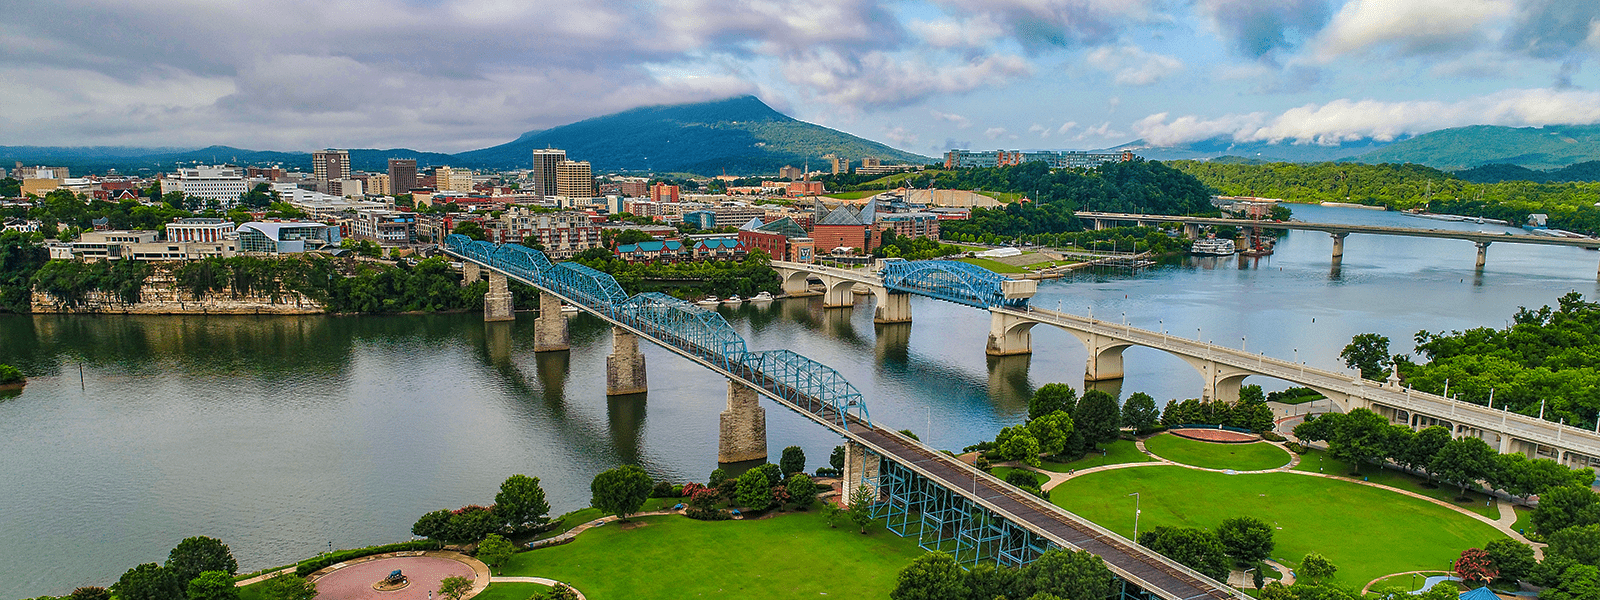 Downtown Chattanooga